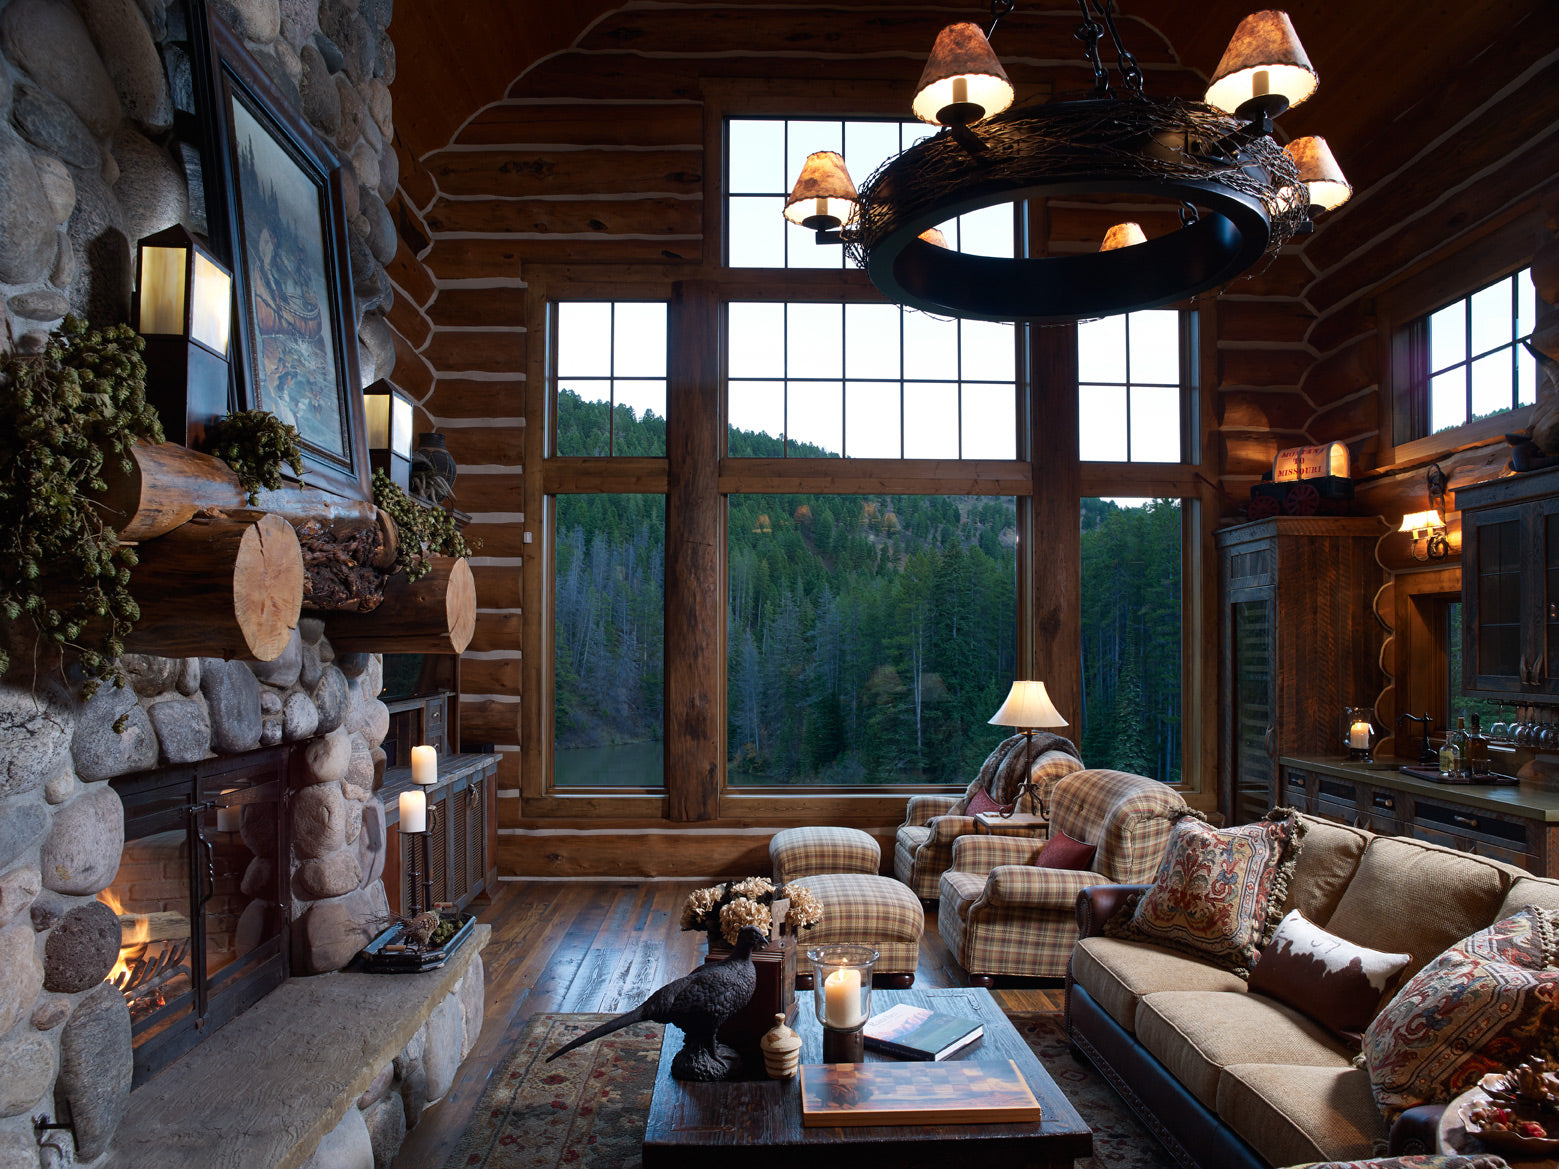 Living room with massive stone fireplace and large windows with mountain views